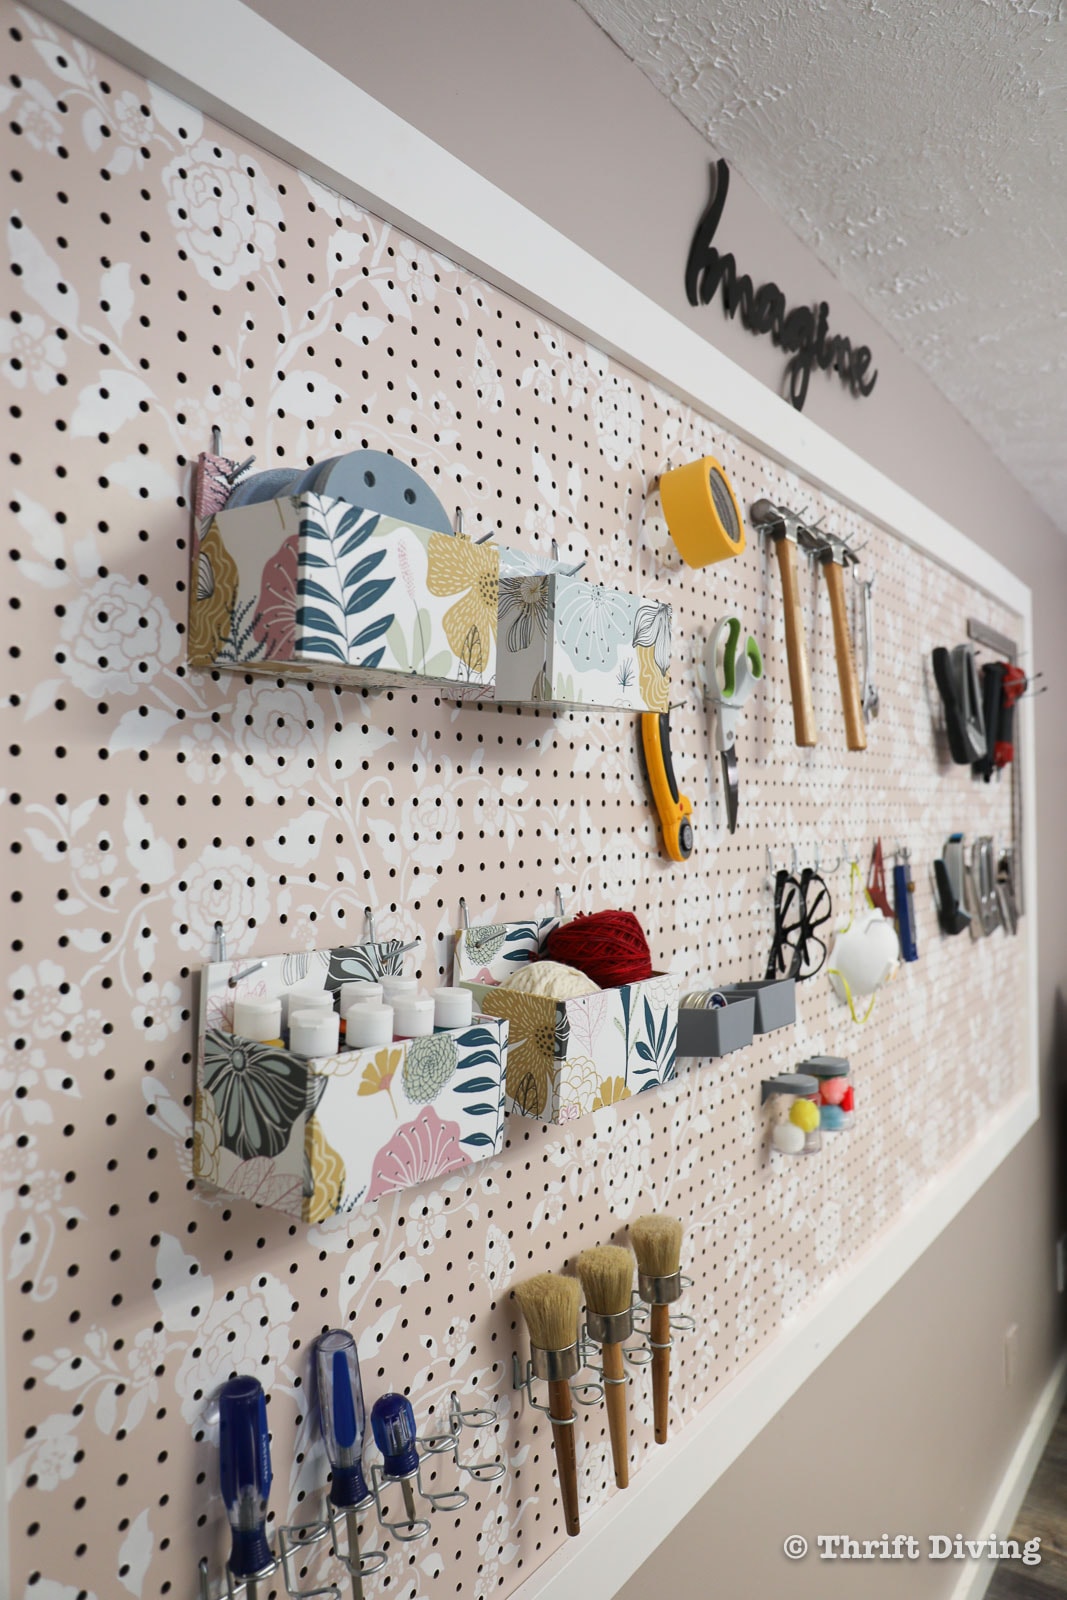 How to Make a Large Framed Pegboard with Organizers